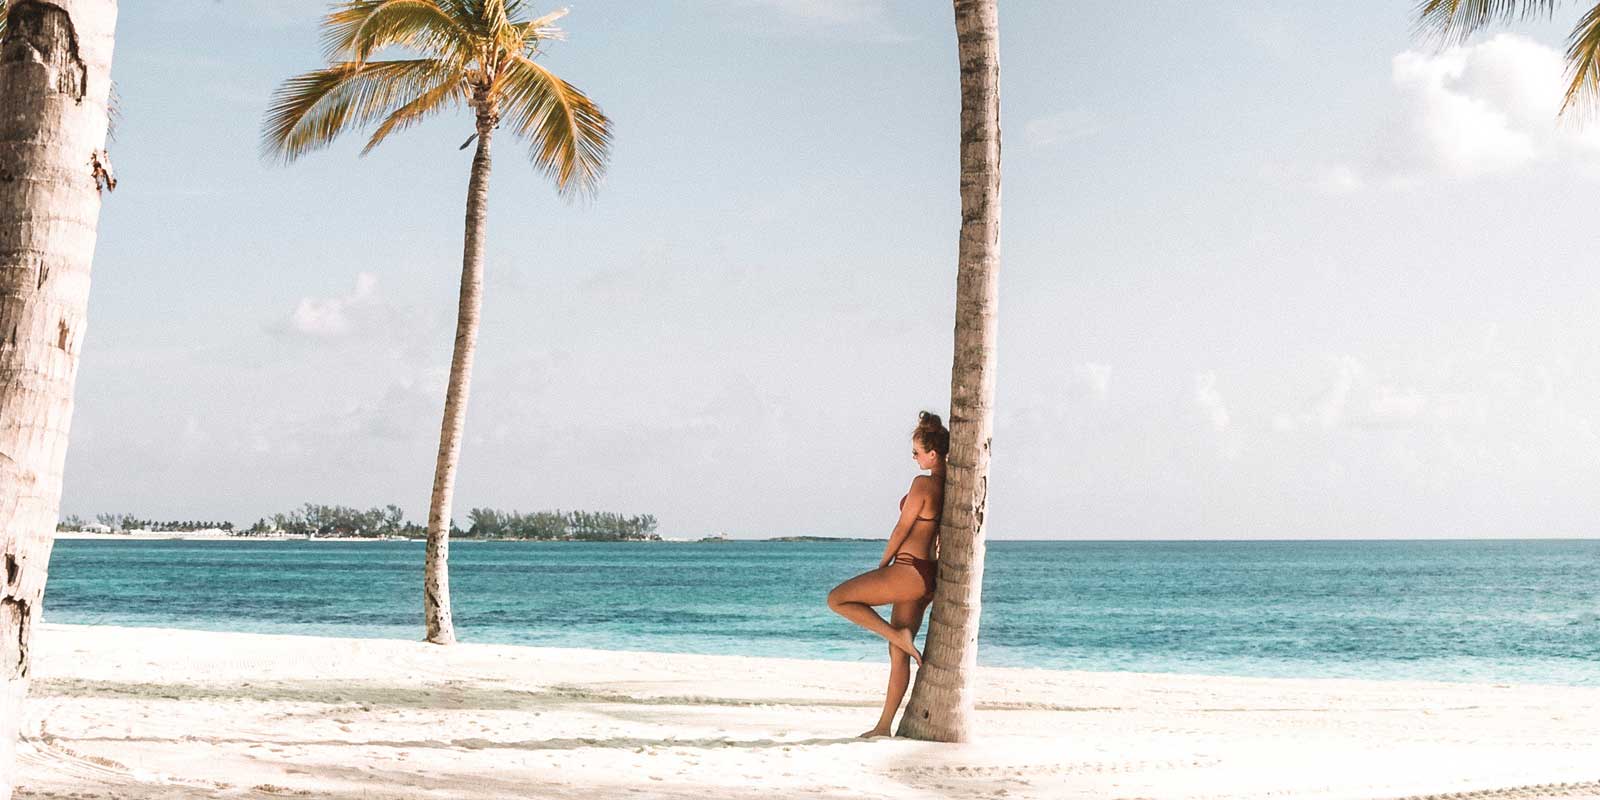 Woman leaning against a palm tree on a deserted beach in Sri Lanka